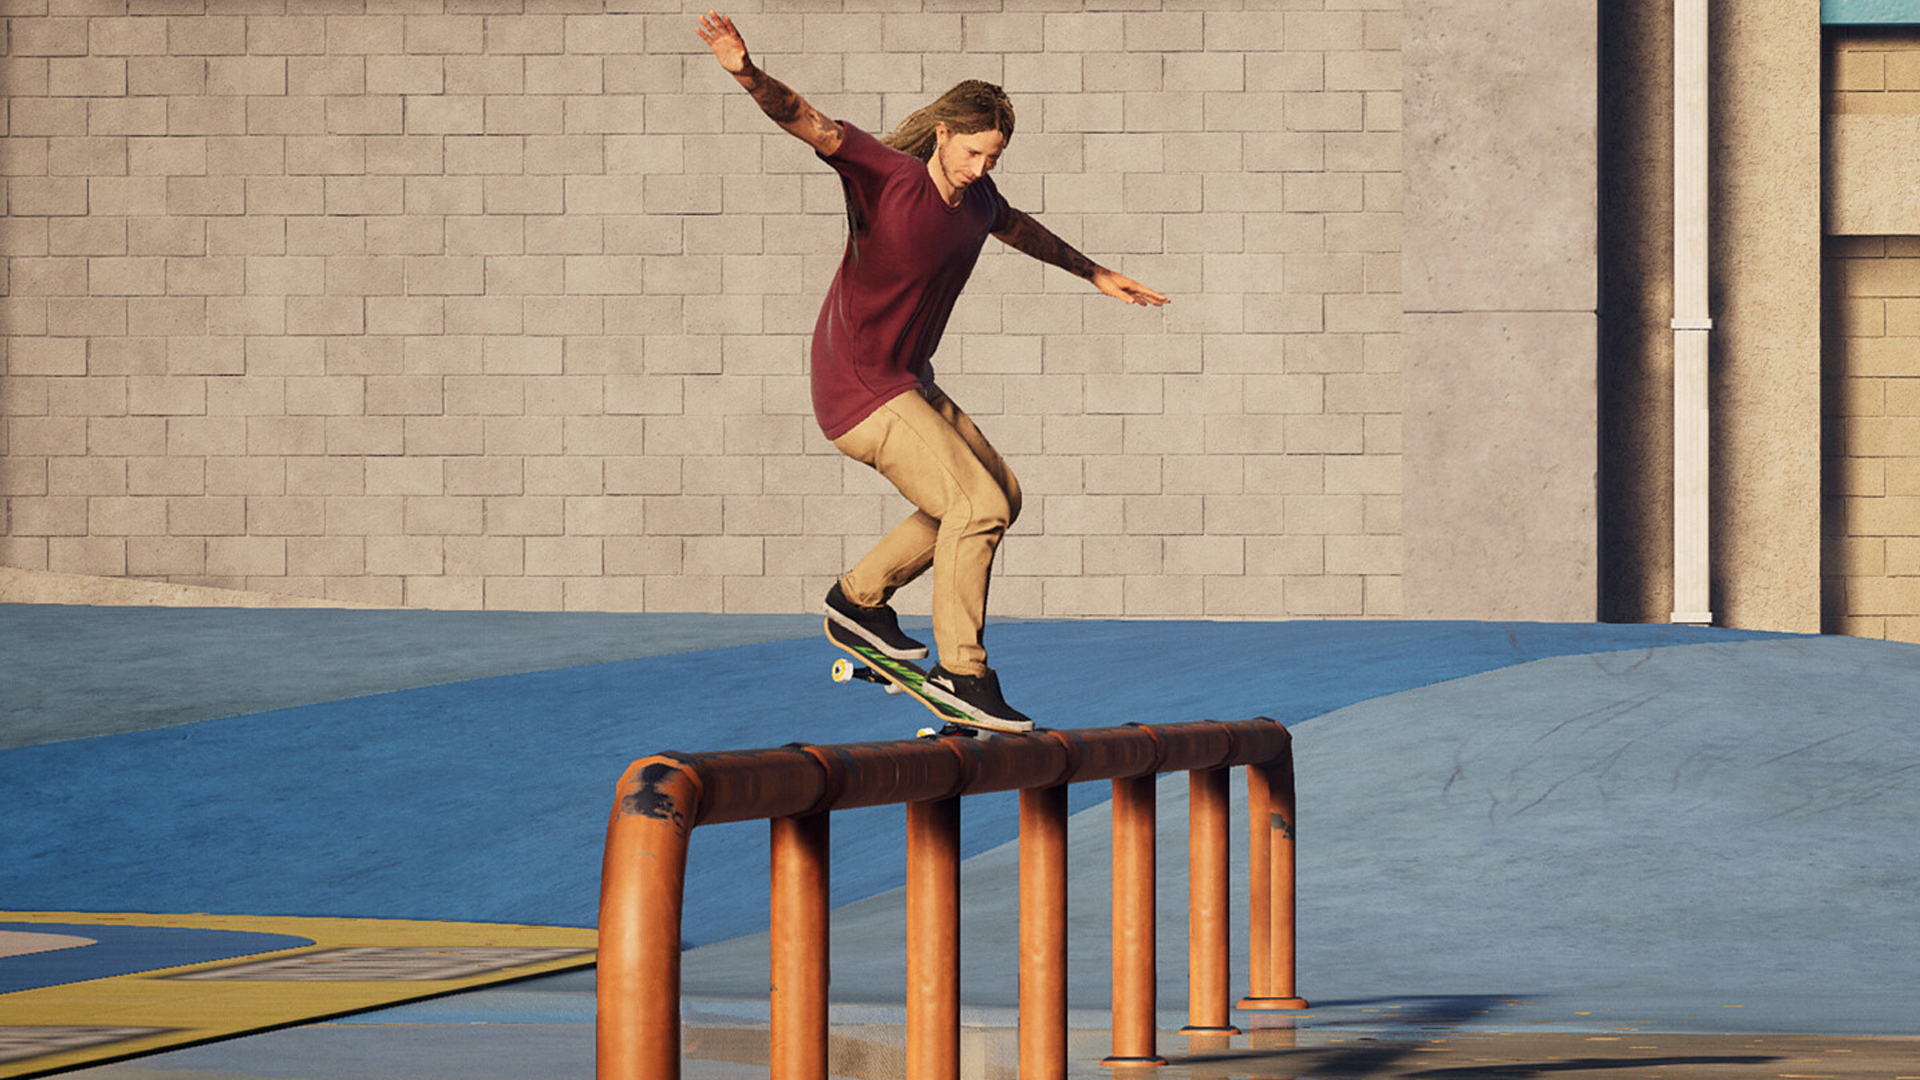 Tony Hawk's Pro Skater 1 + 2: Playing guide/tips